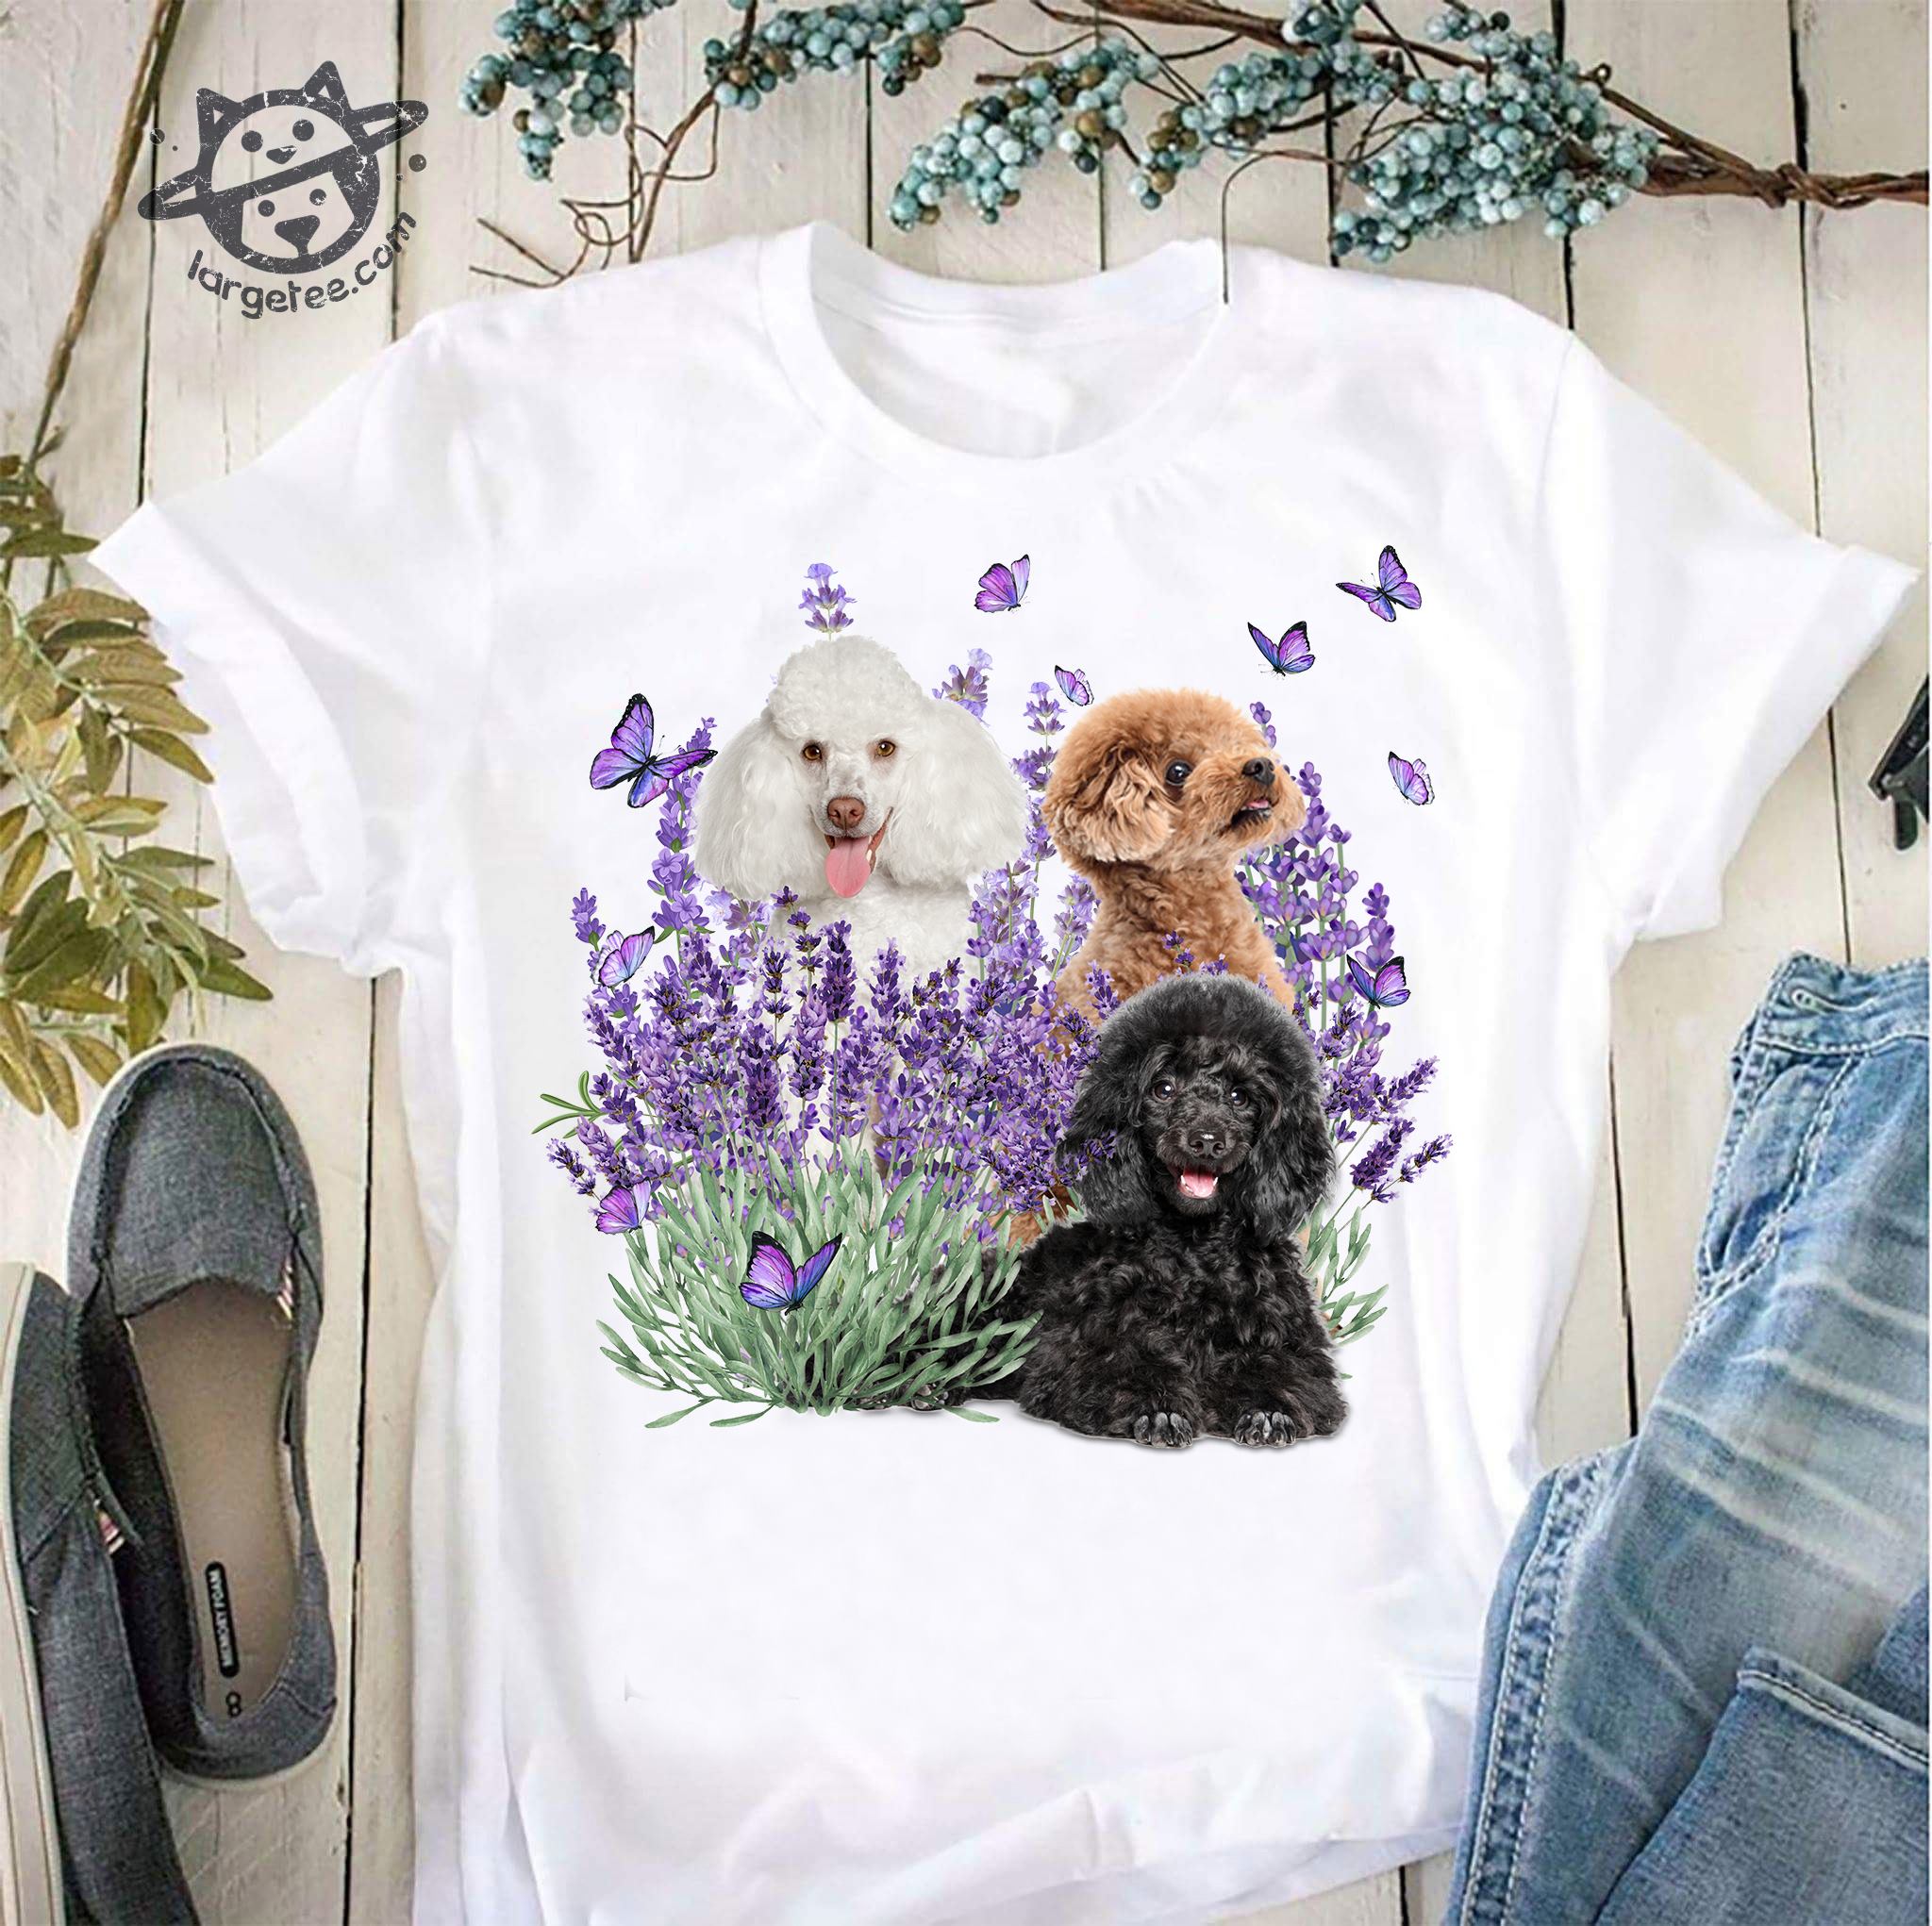 Poodle dog and butterflies - Dog lover